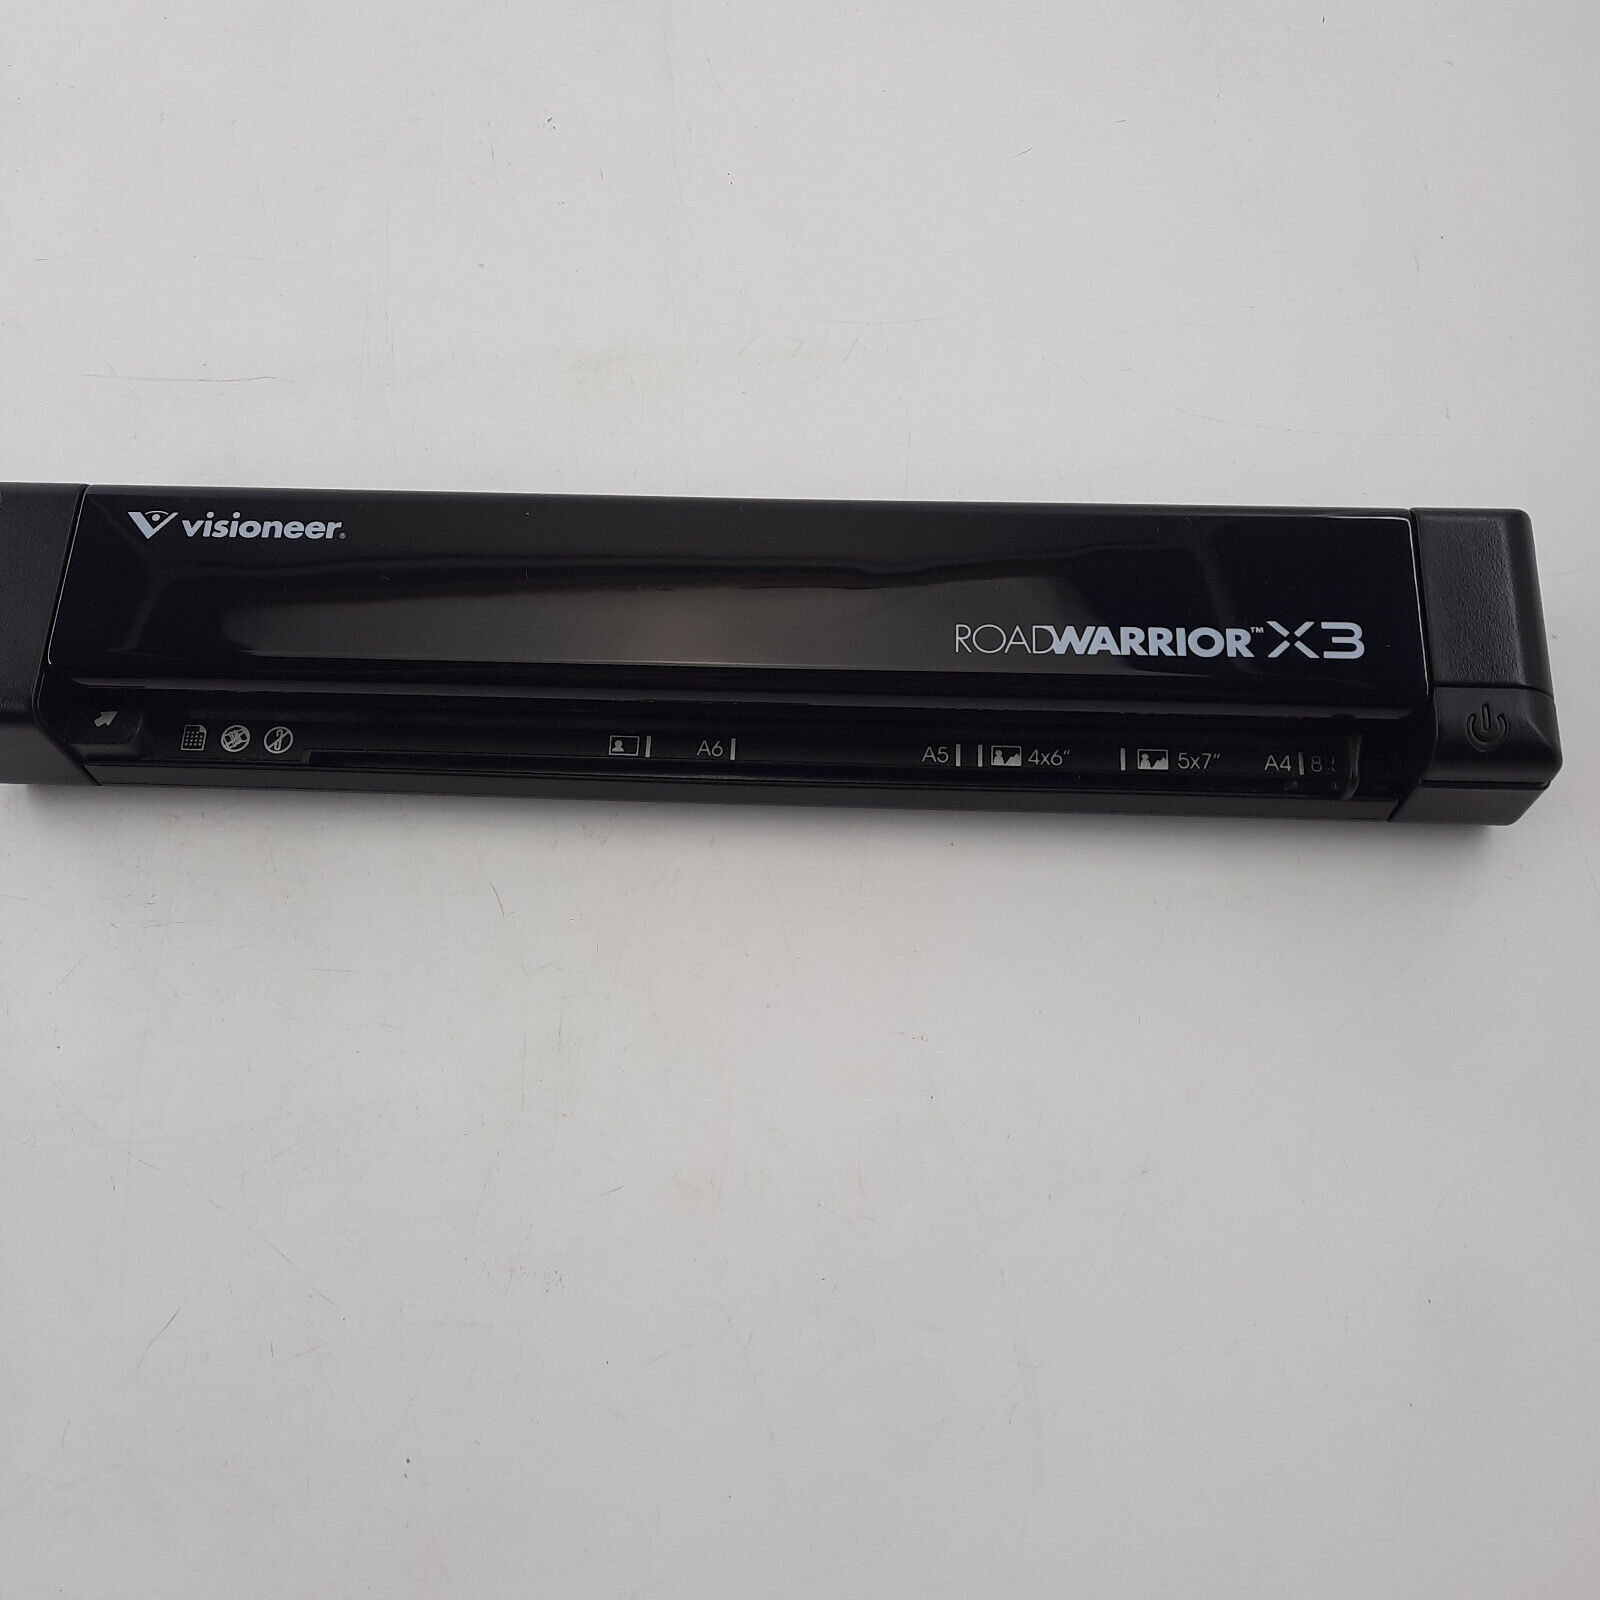 Visioneer RoadWarrior X3 Compact Portable Scanner For Receipts, Docs, Notes